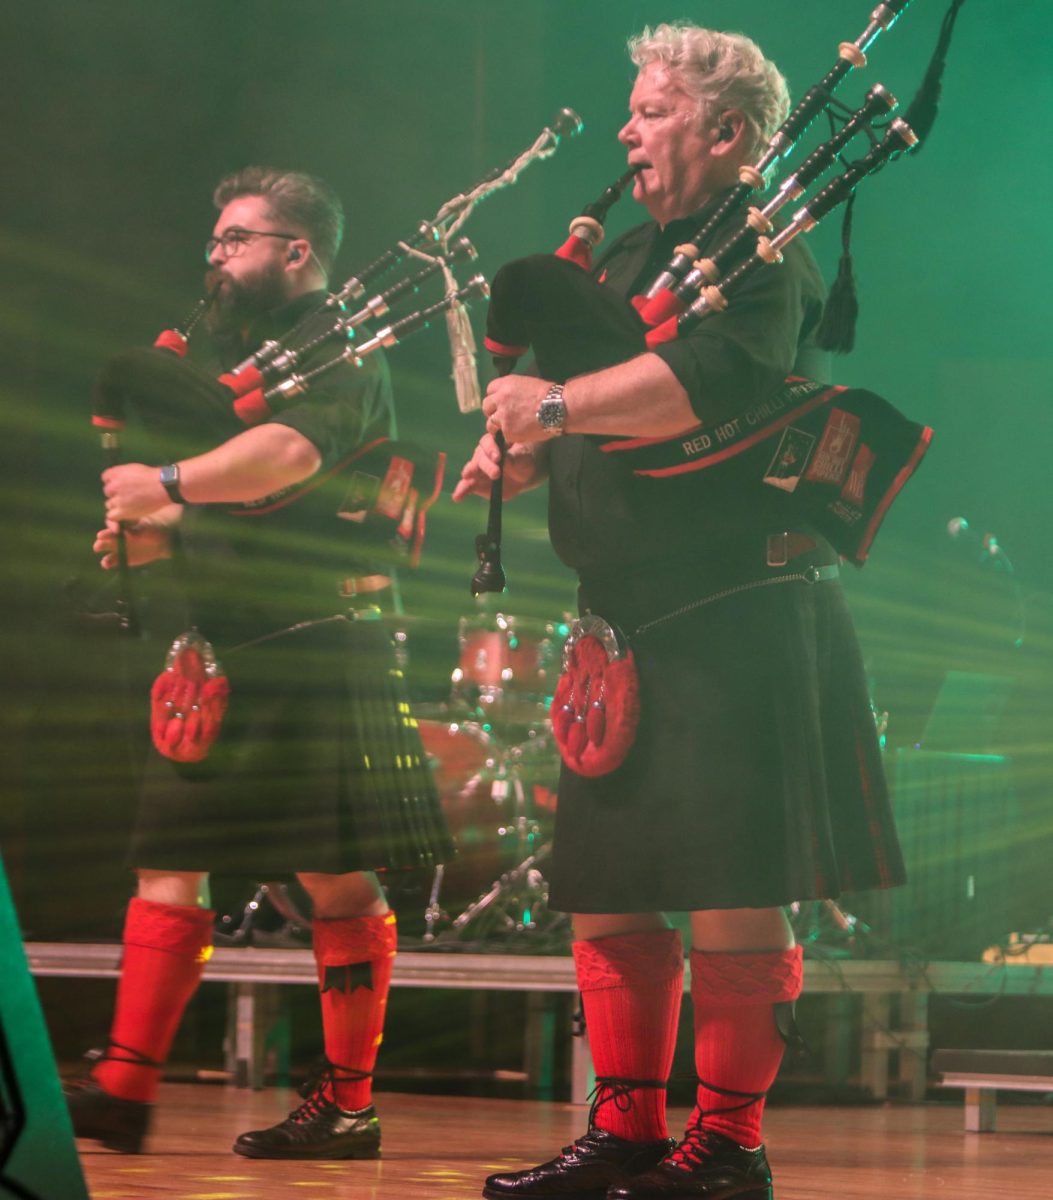 From+left%2C+bagpipers+Ross+Miller+and+Willie+Armstrong+play+together+during+the+Red+Hot+Chilli+Pipers+performance+held+in+the+Dvorak+Concert+Hall+Saturday.+